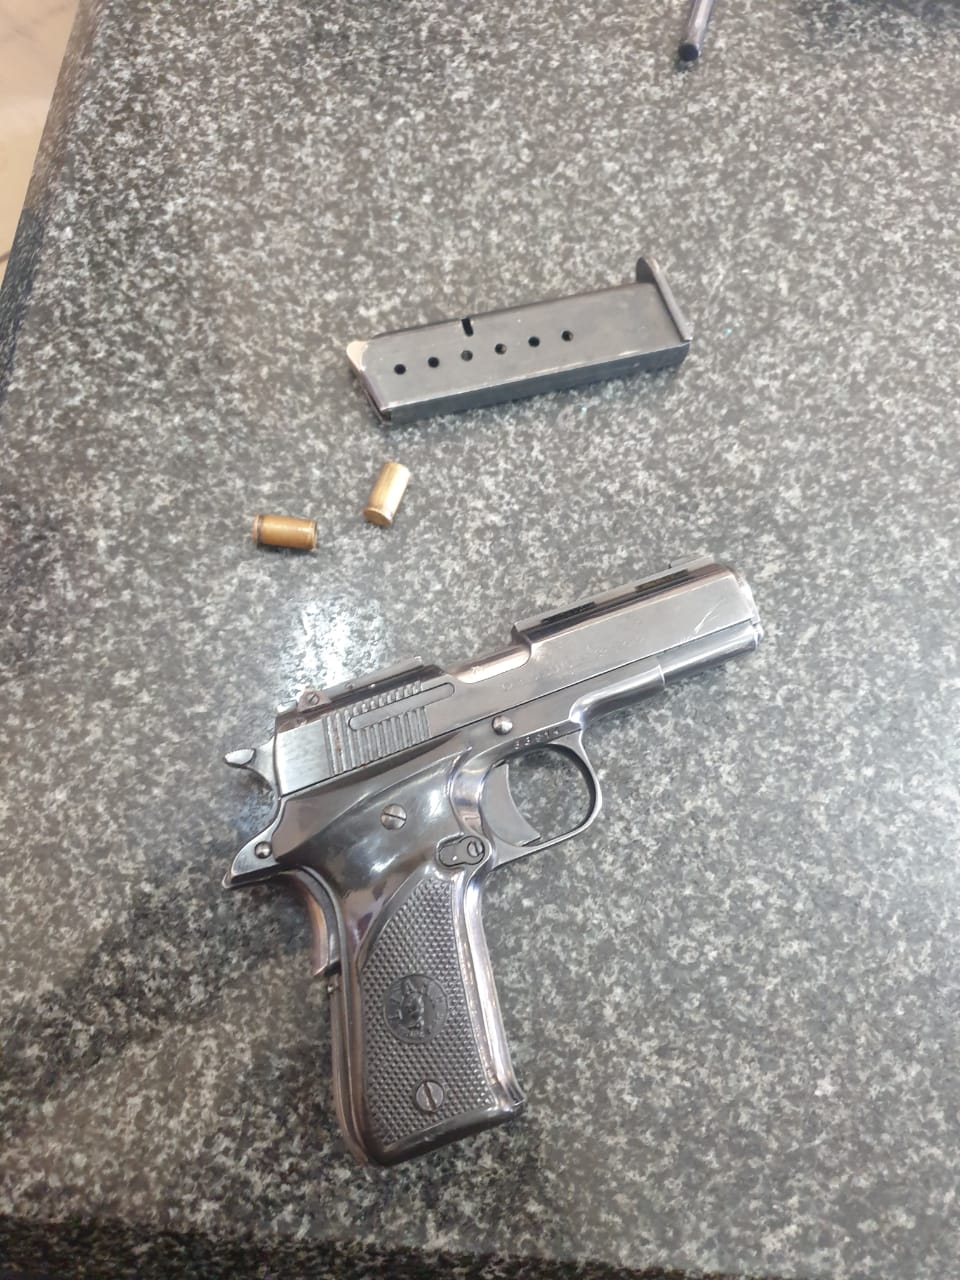 Trio Task Team arrests suspects with a pistol and drugs